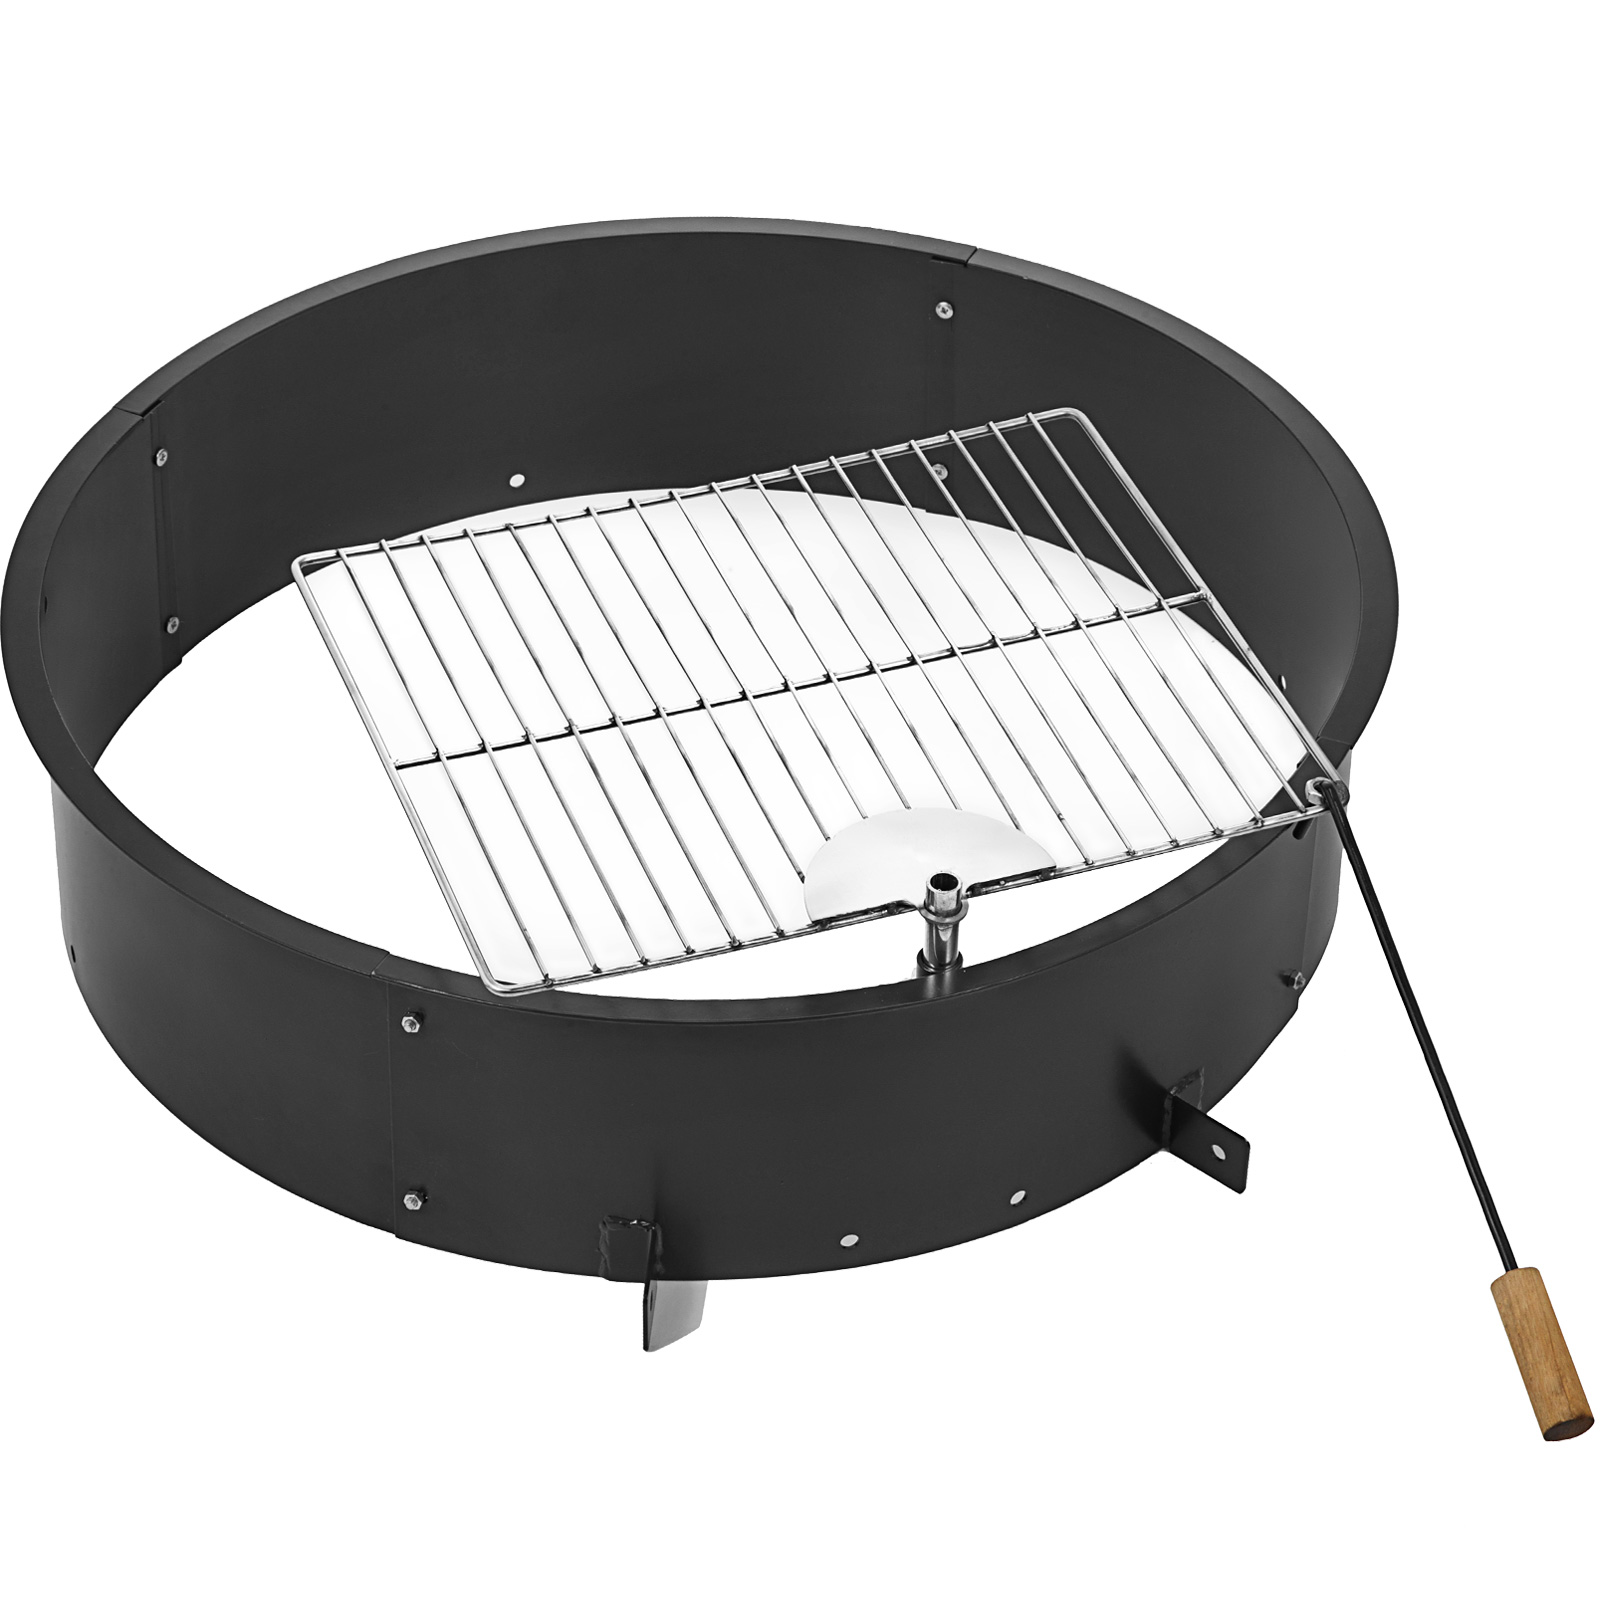 Bbq Grill Fire Bowl Durable Steel, 24 Inch Round Fire Pit Bowl Replacement